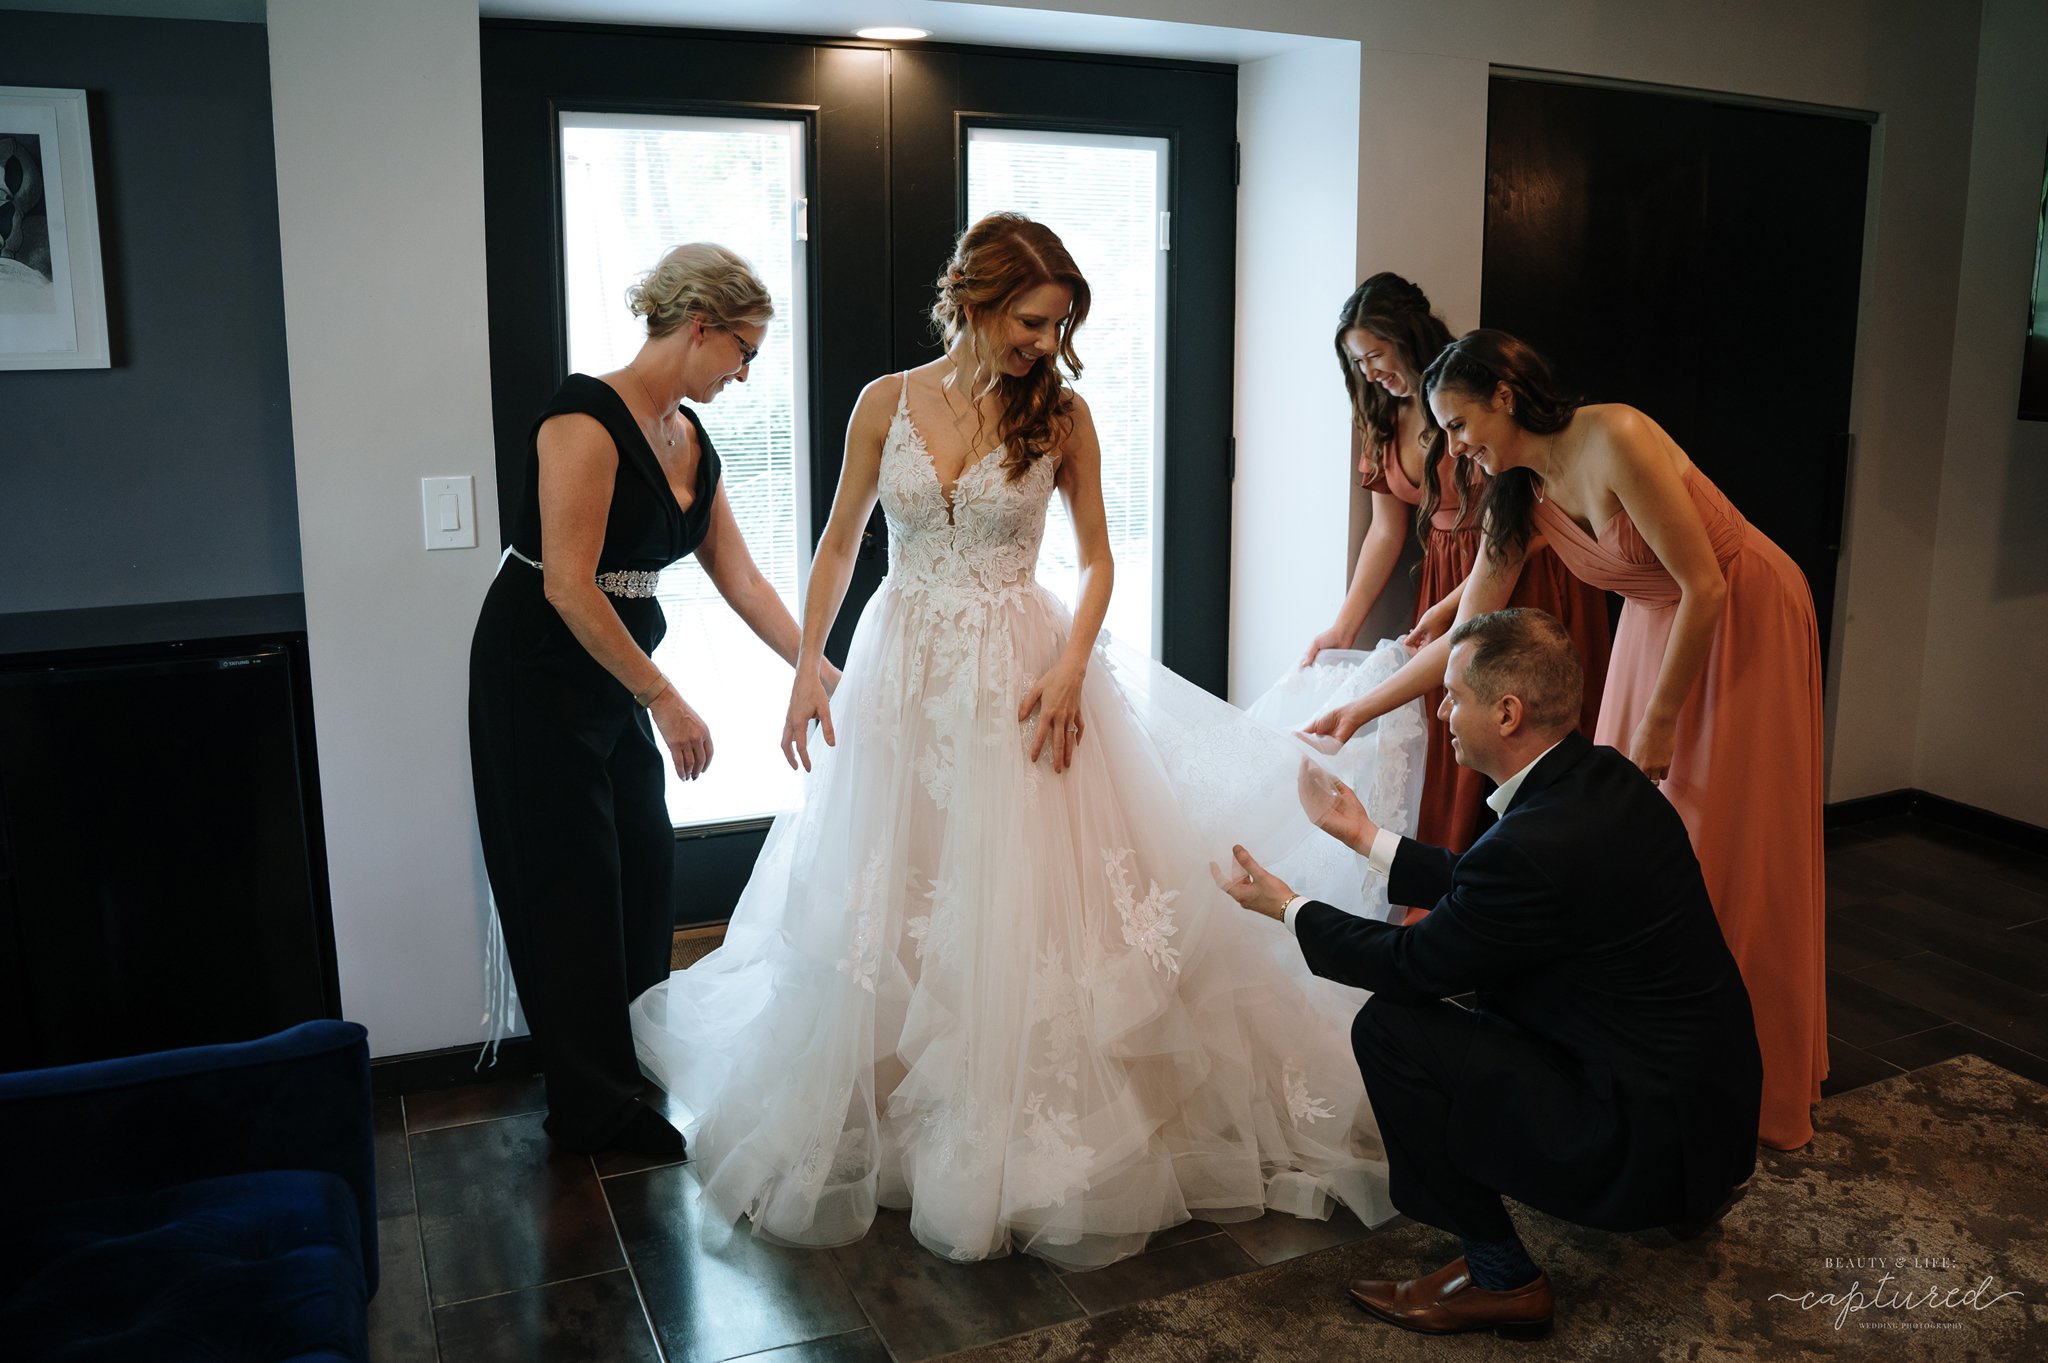 Beauty_and_Life_Captured_Jacquelyn_and_Adrian_Wedding-92.jpg